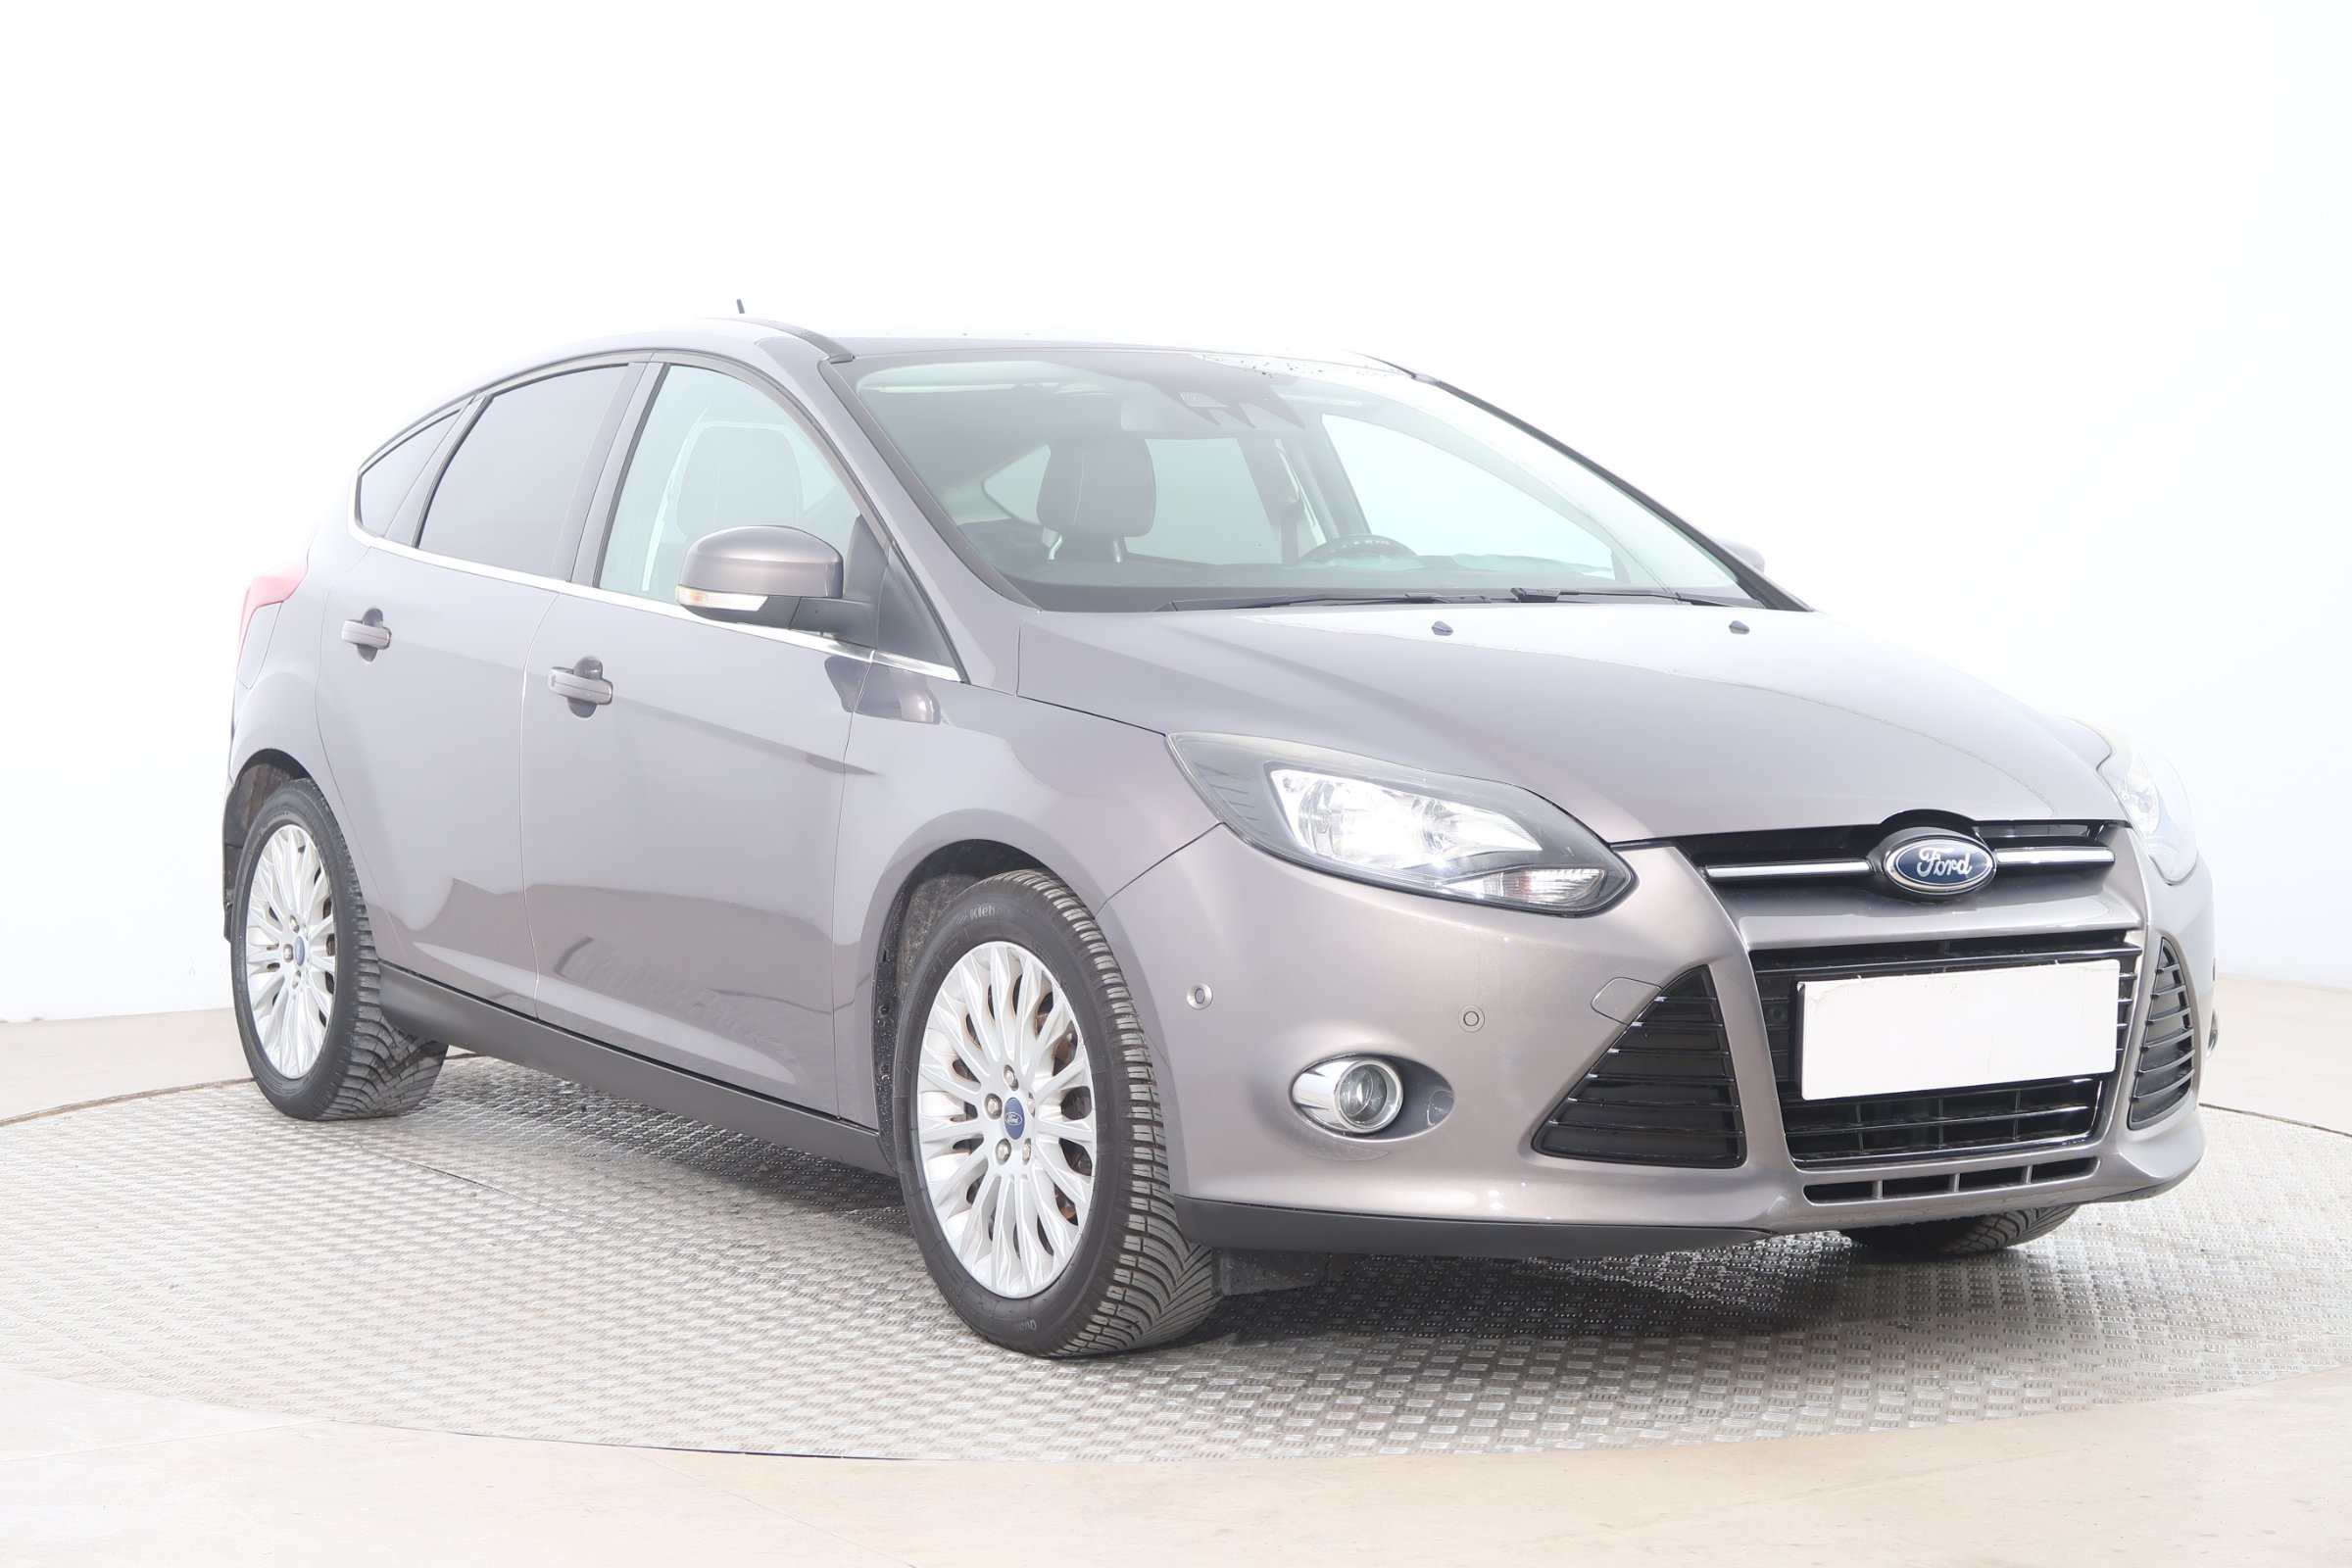 Ford Focus 1.6 Duratec Ti-VCT Hatchback 2011 - 1